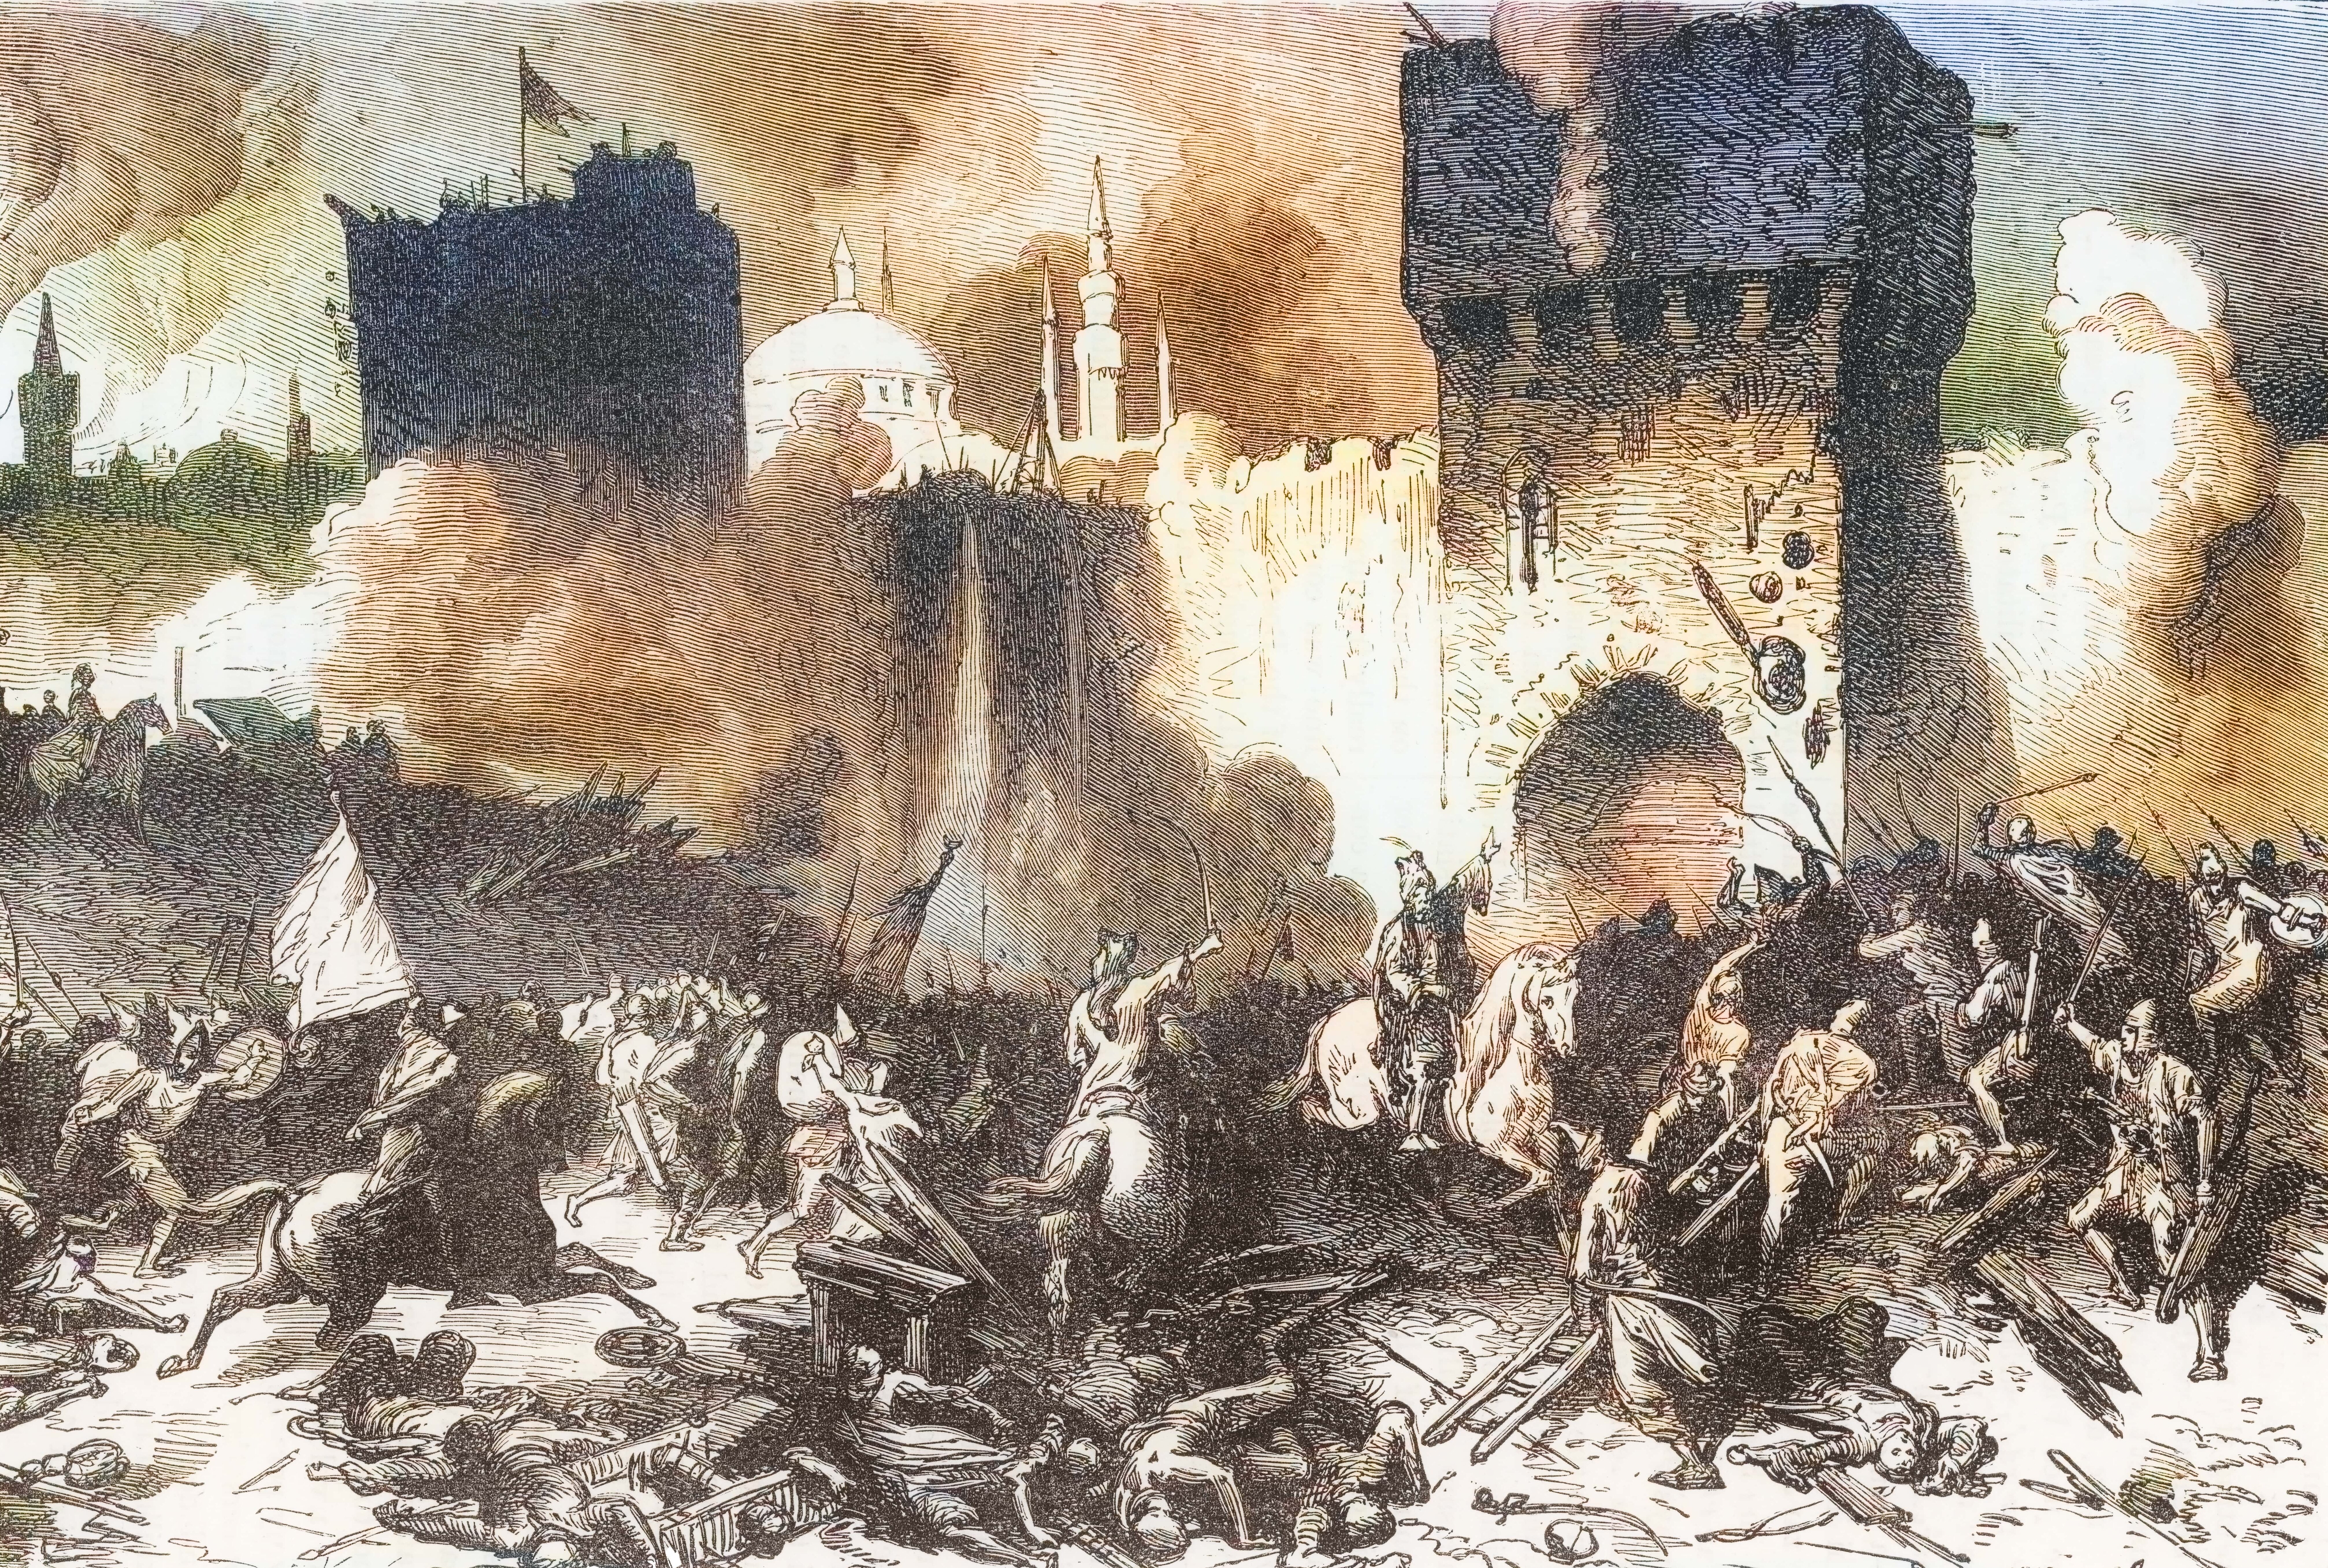 The Fall of Constantinople, capital of the Byzantine Empire, by the Ottoman Empire. (mikroman6/Moment via Getty Images)